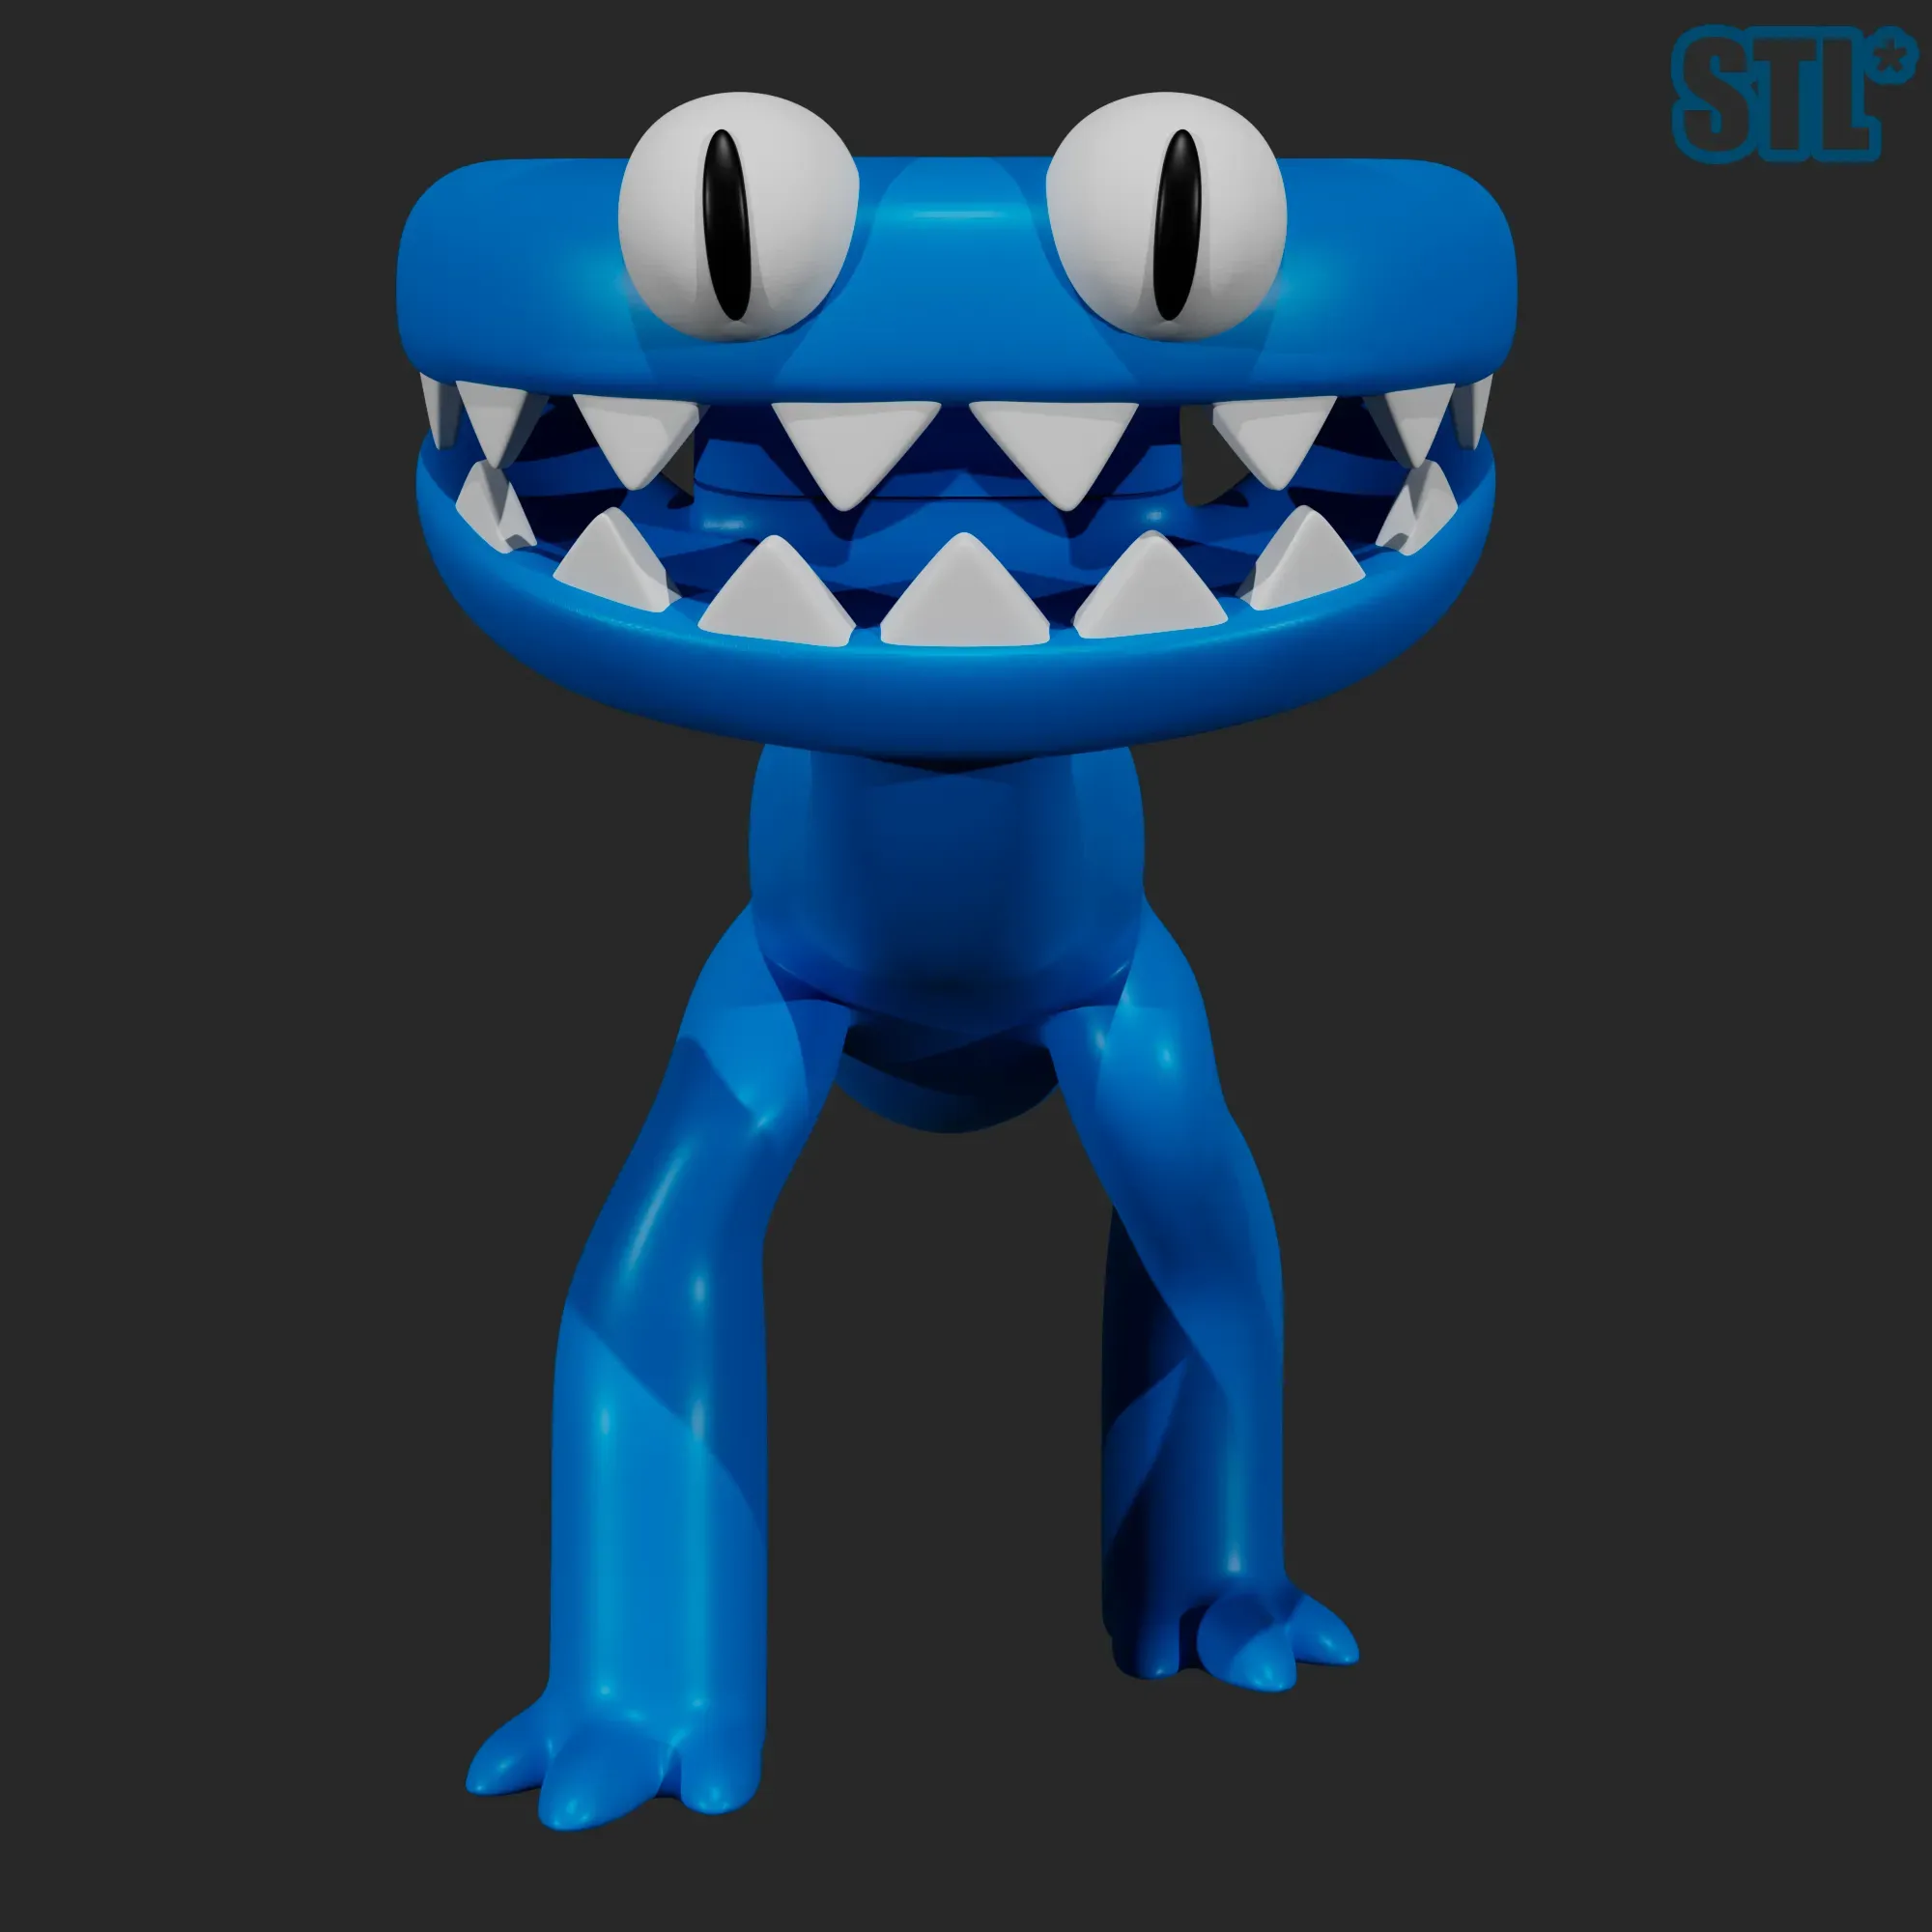 STL file ALL MONSTERS FROM RAINBOW FRIENDS ROBLOX